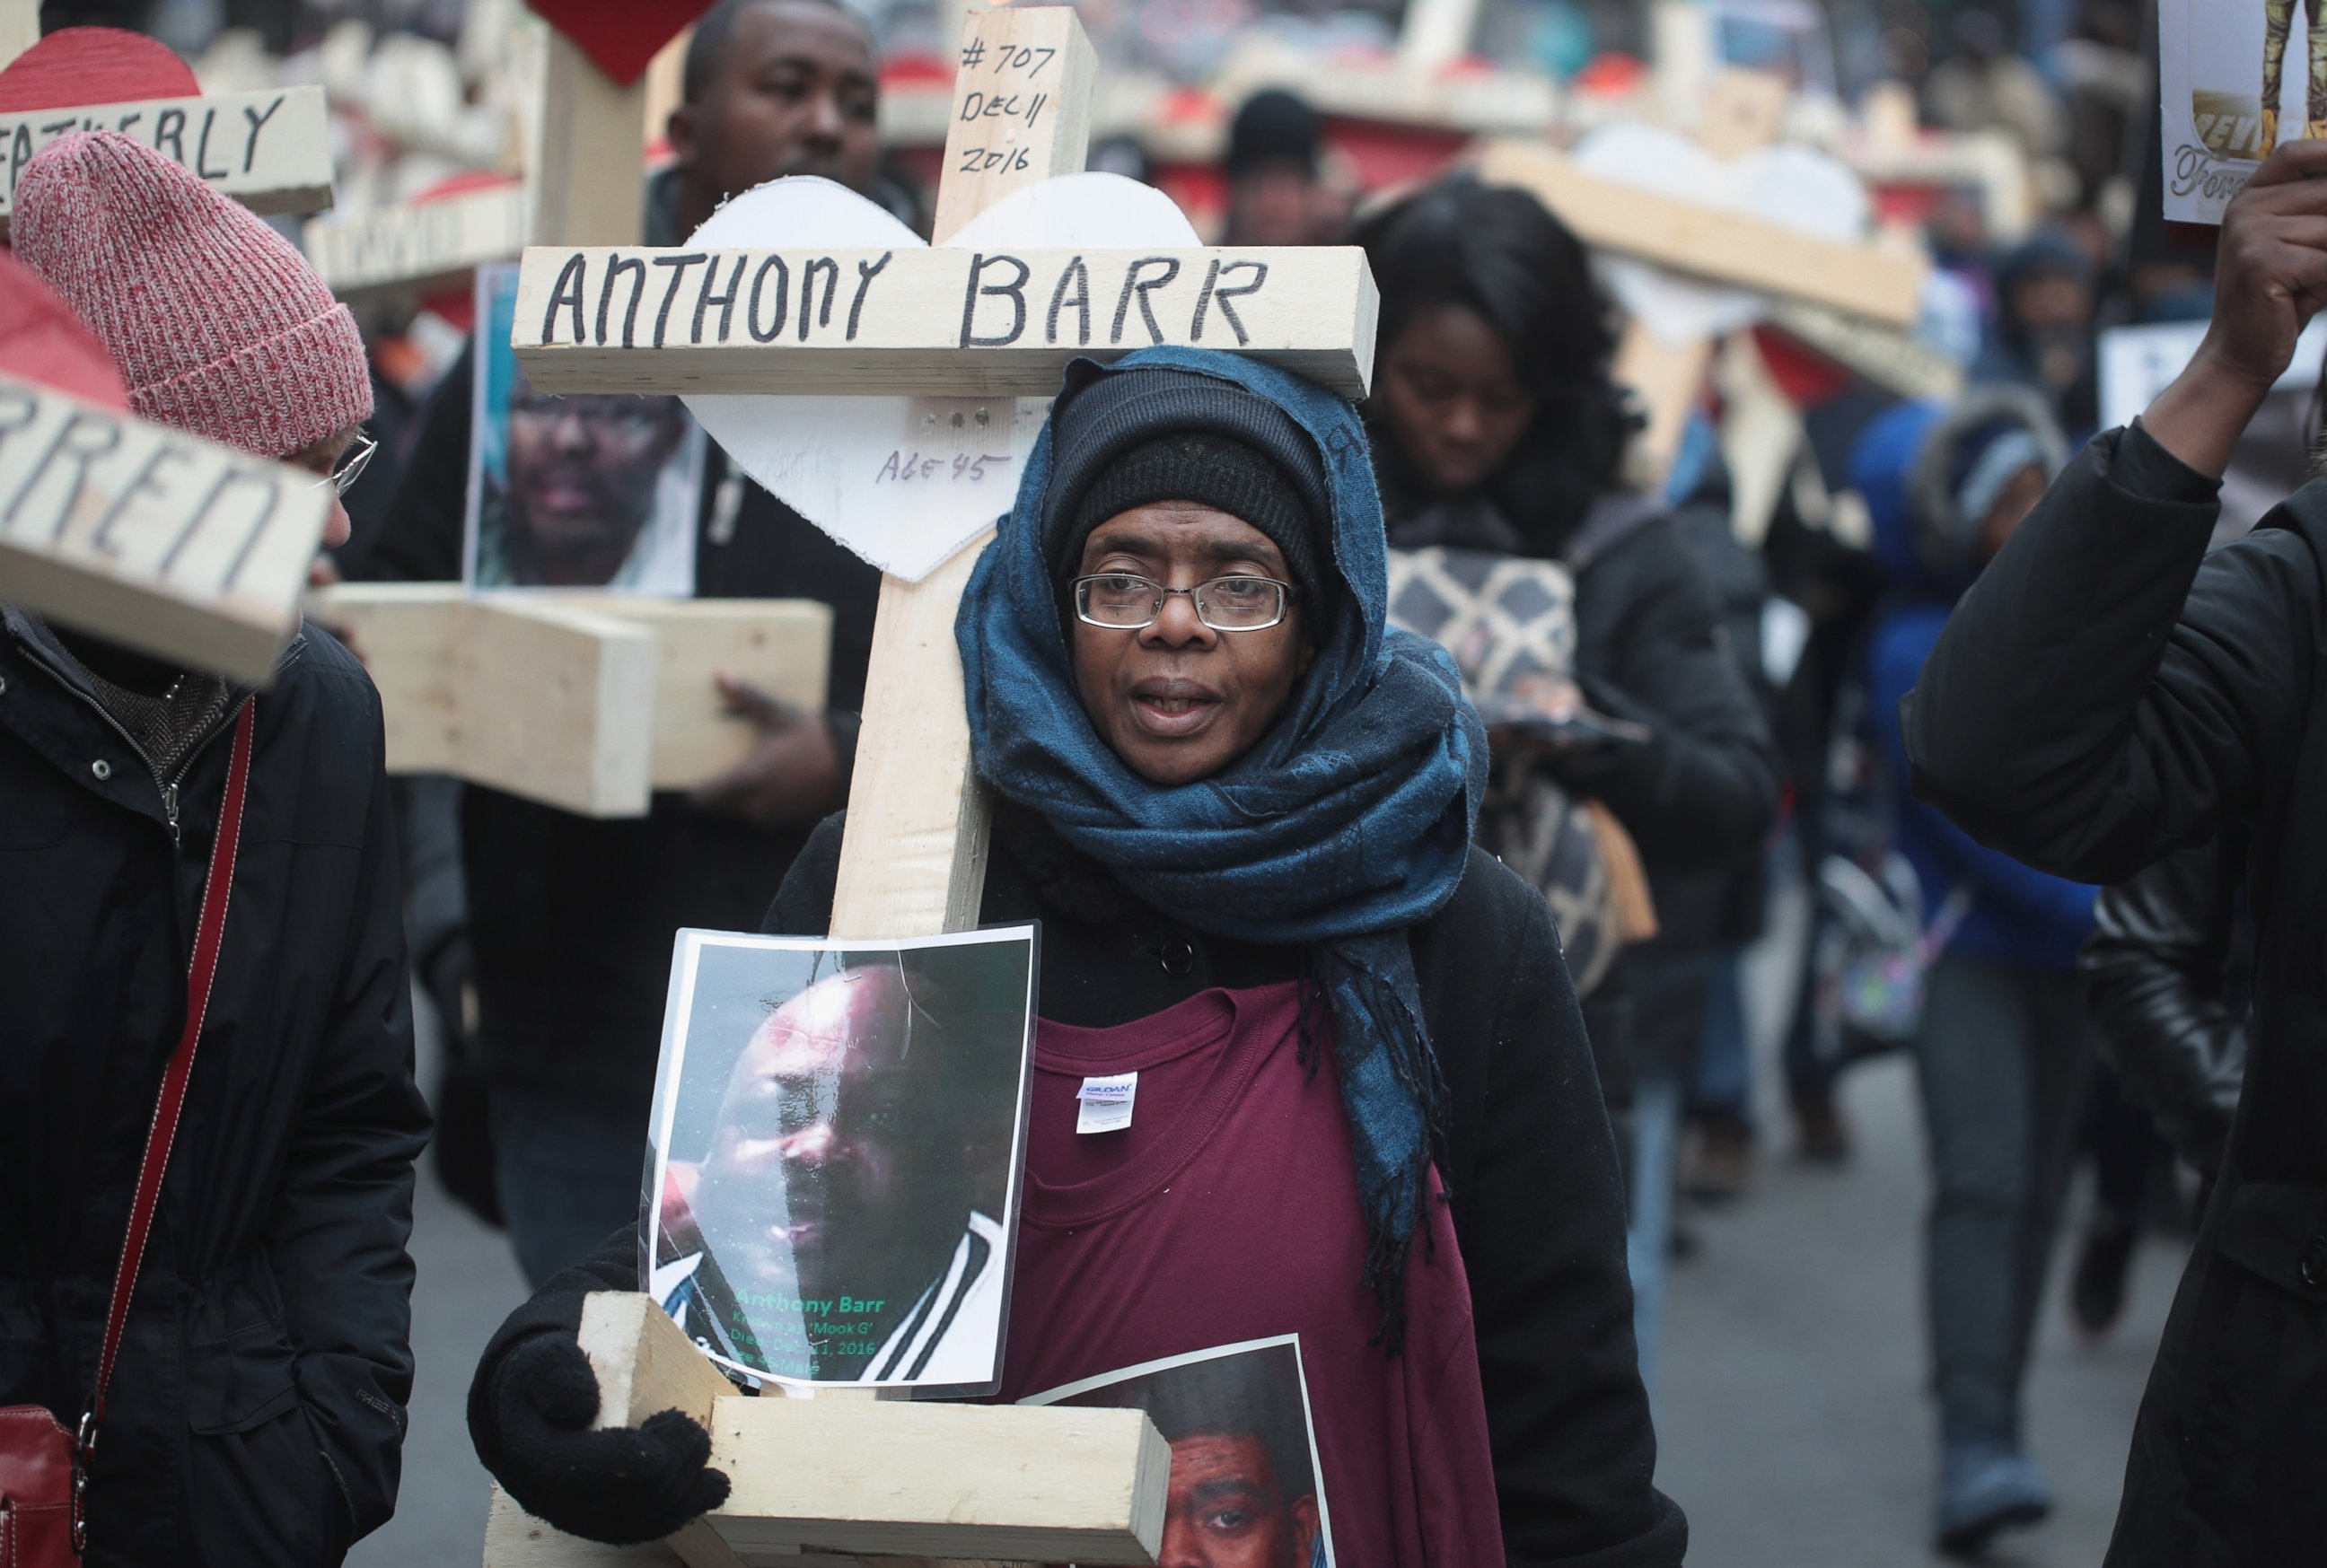 PHOTO: Melva Pratt carries a cross as she marches with other residents, activists, and family members of victims of gun violence down Michigan Avenue, Dec. 31, 2016 in Chicago.